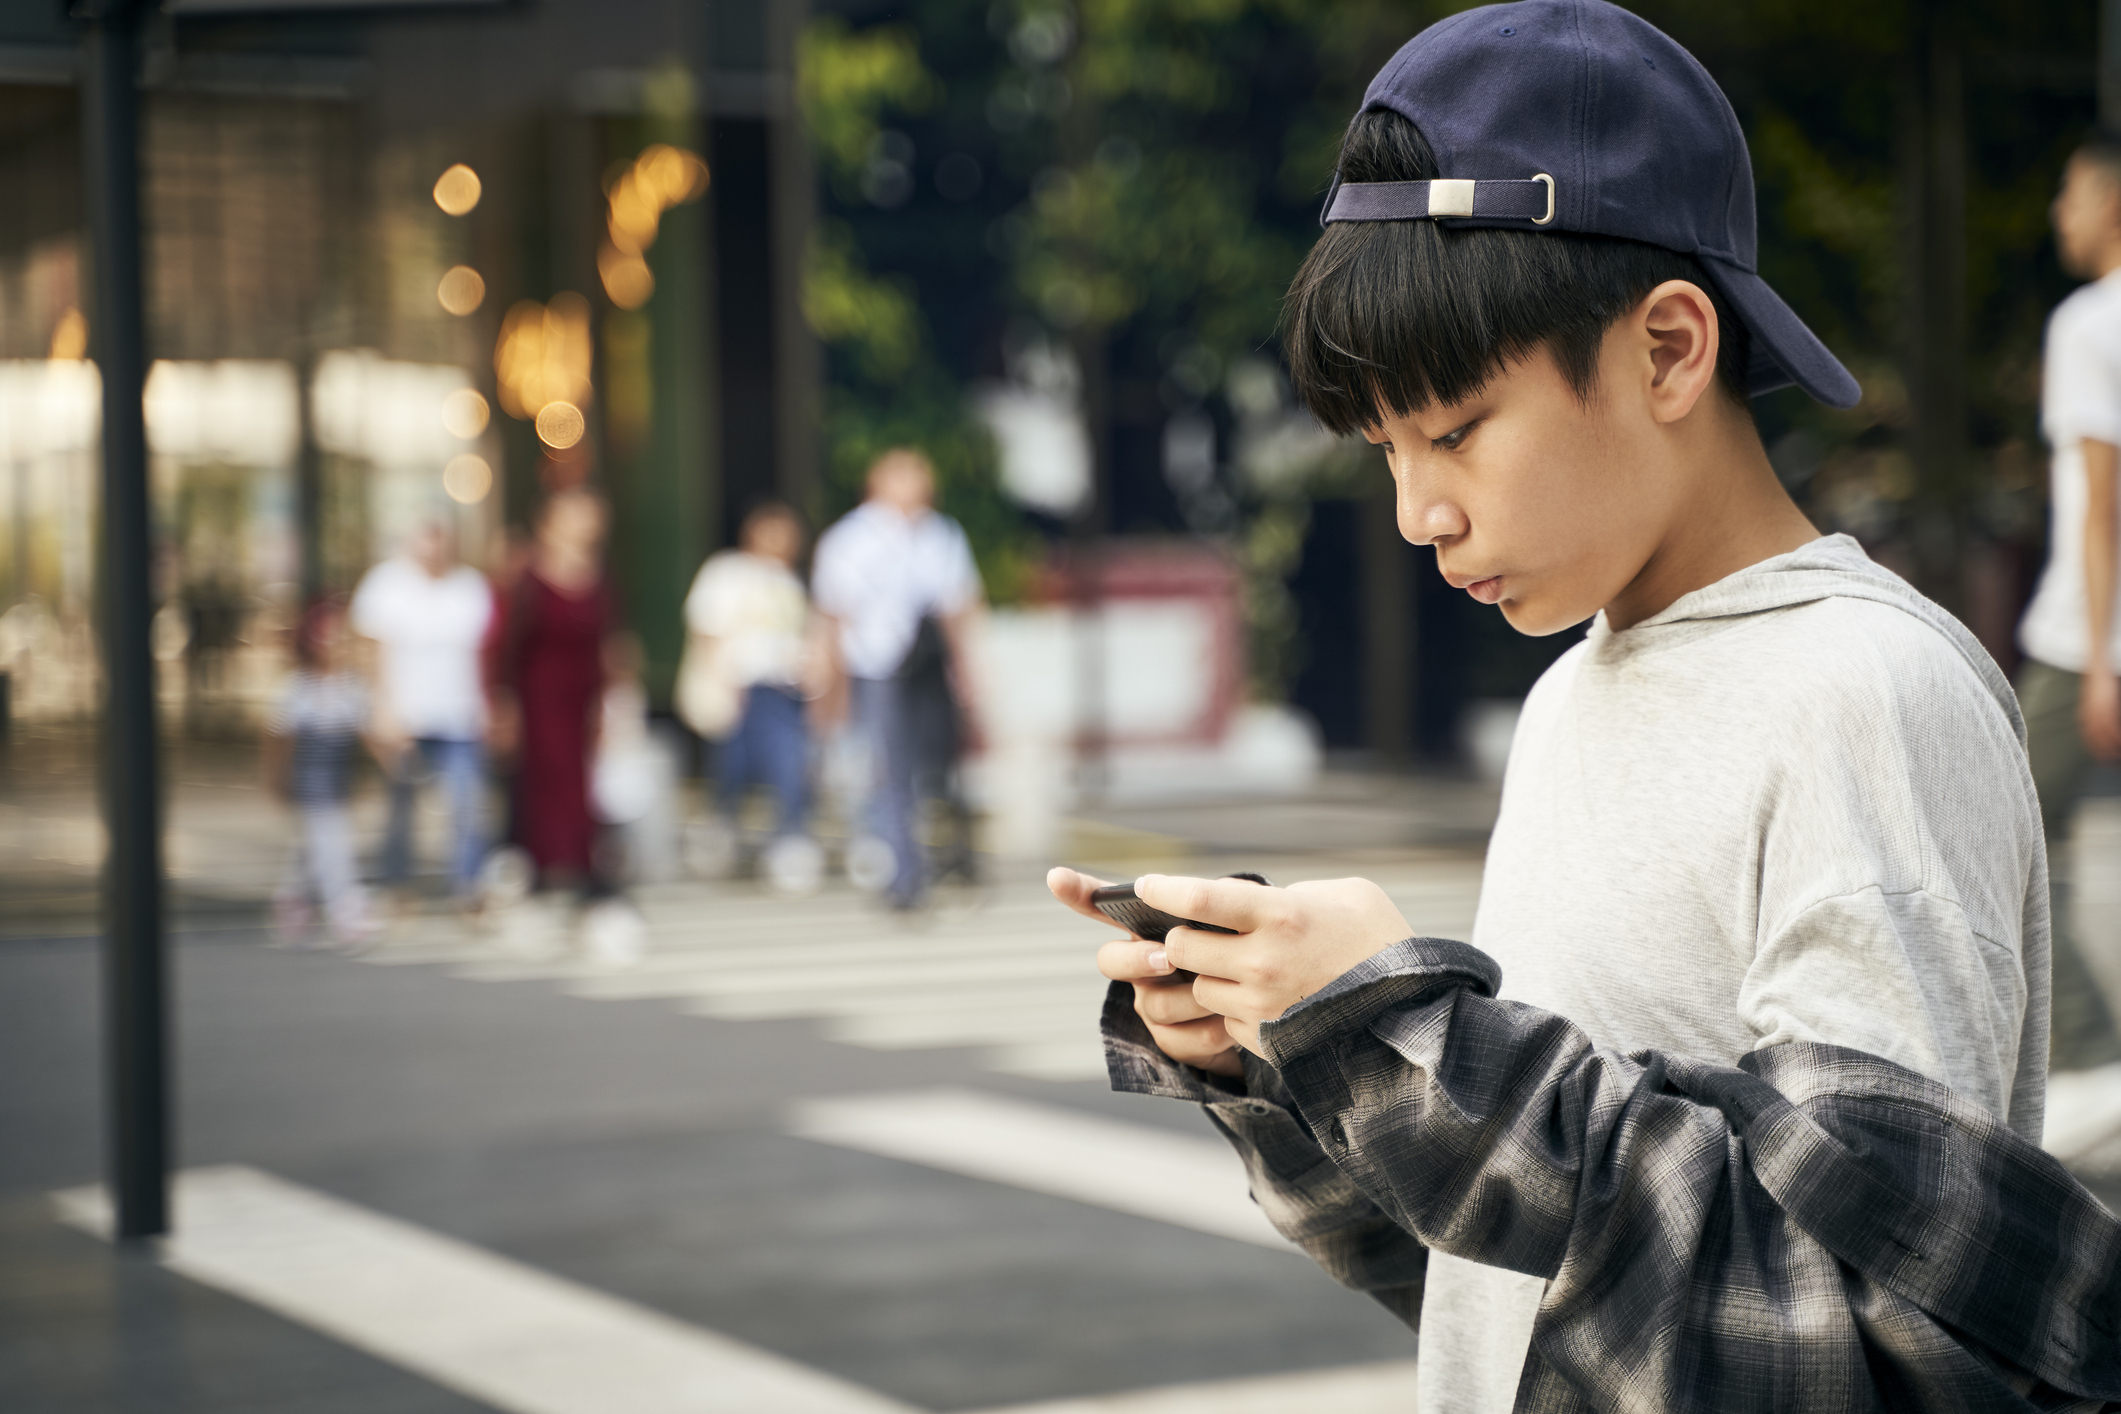 Teen in a cap and layered shirts focused on smartphone with blurred people walking in the background